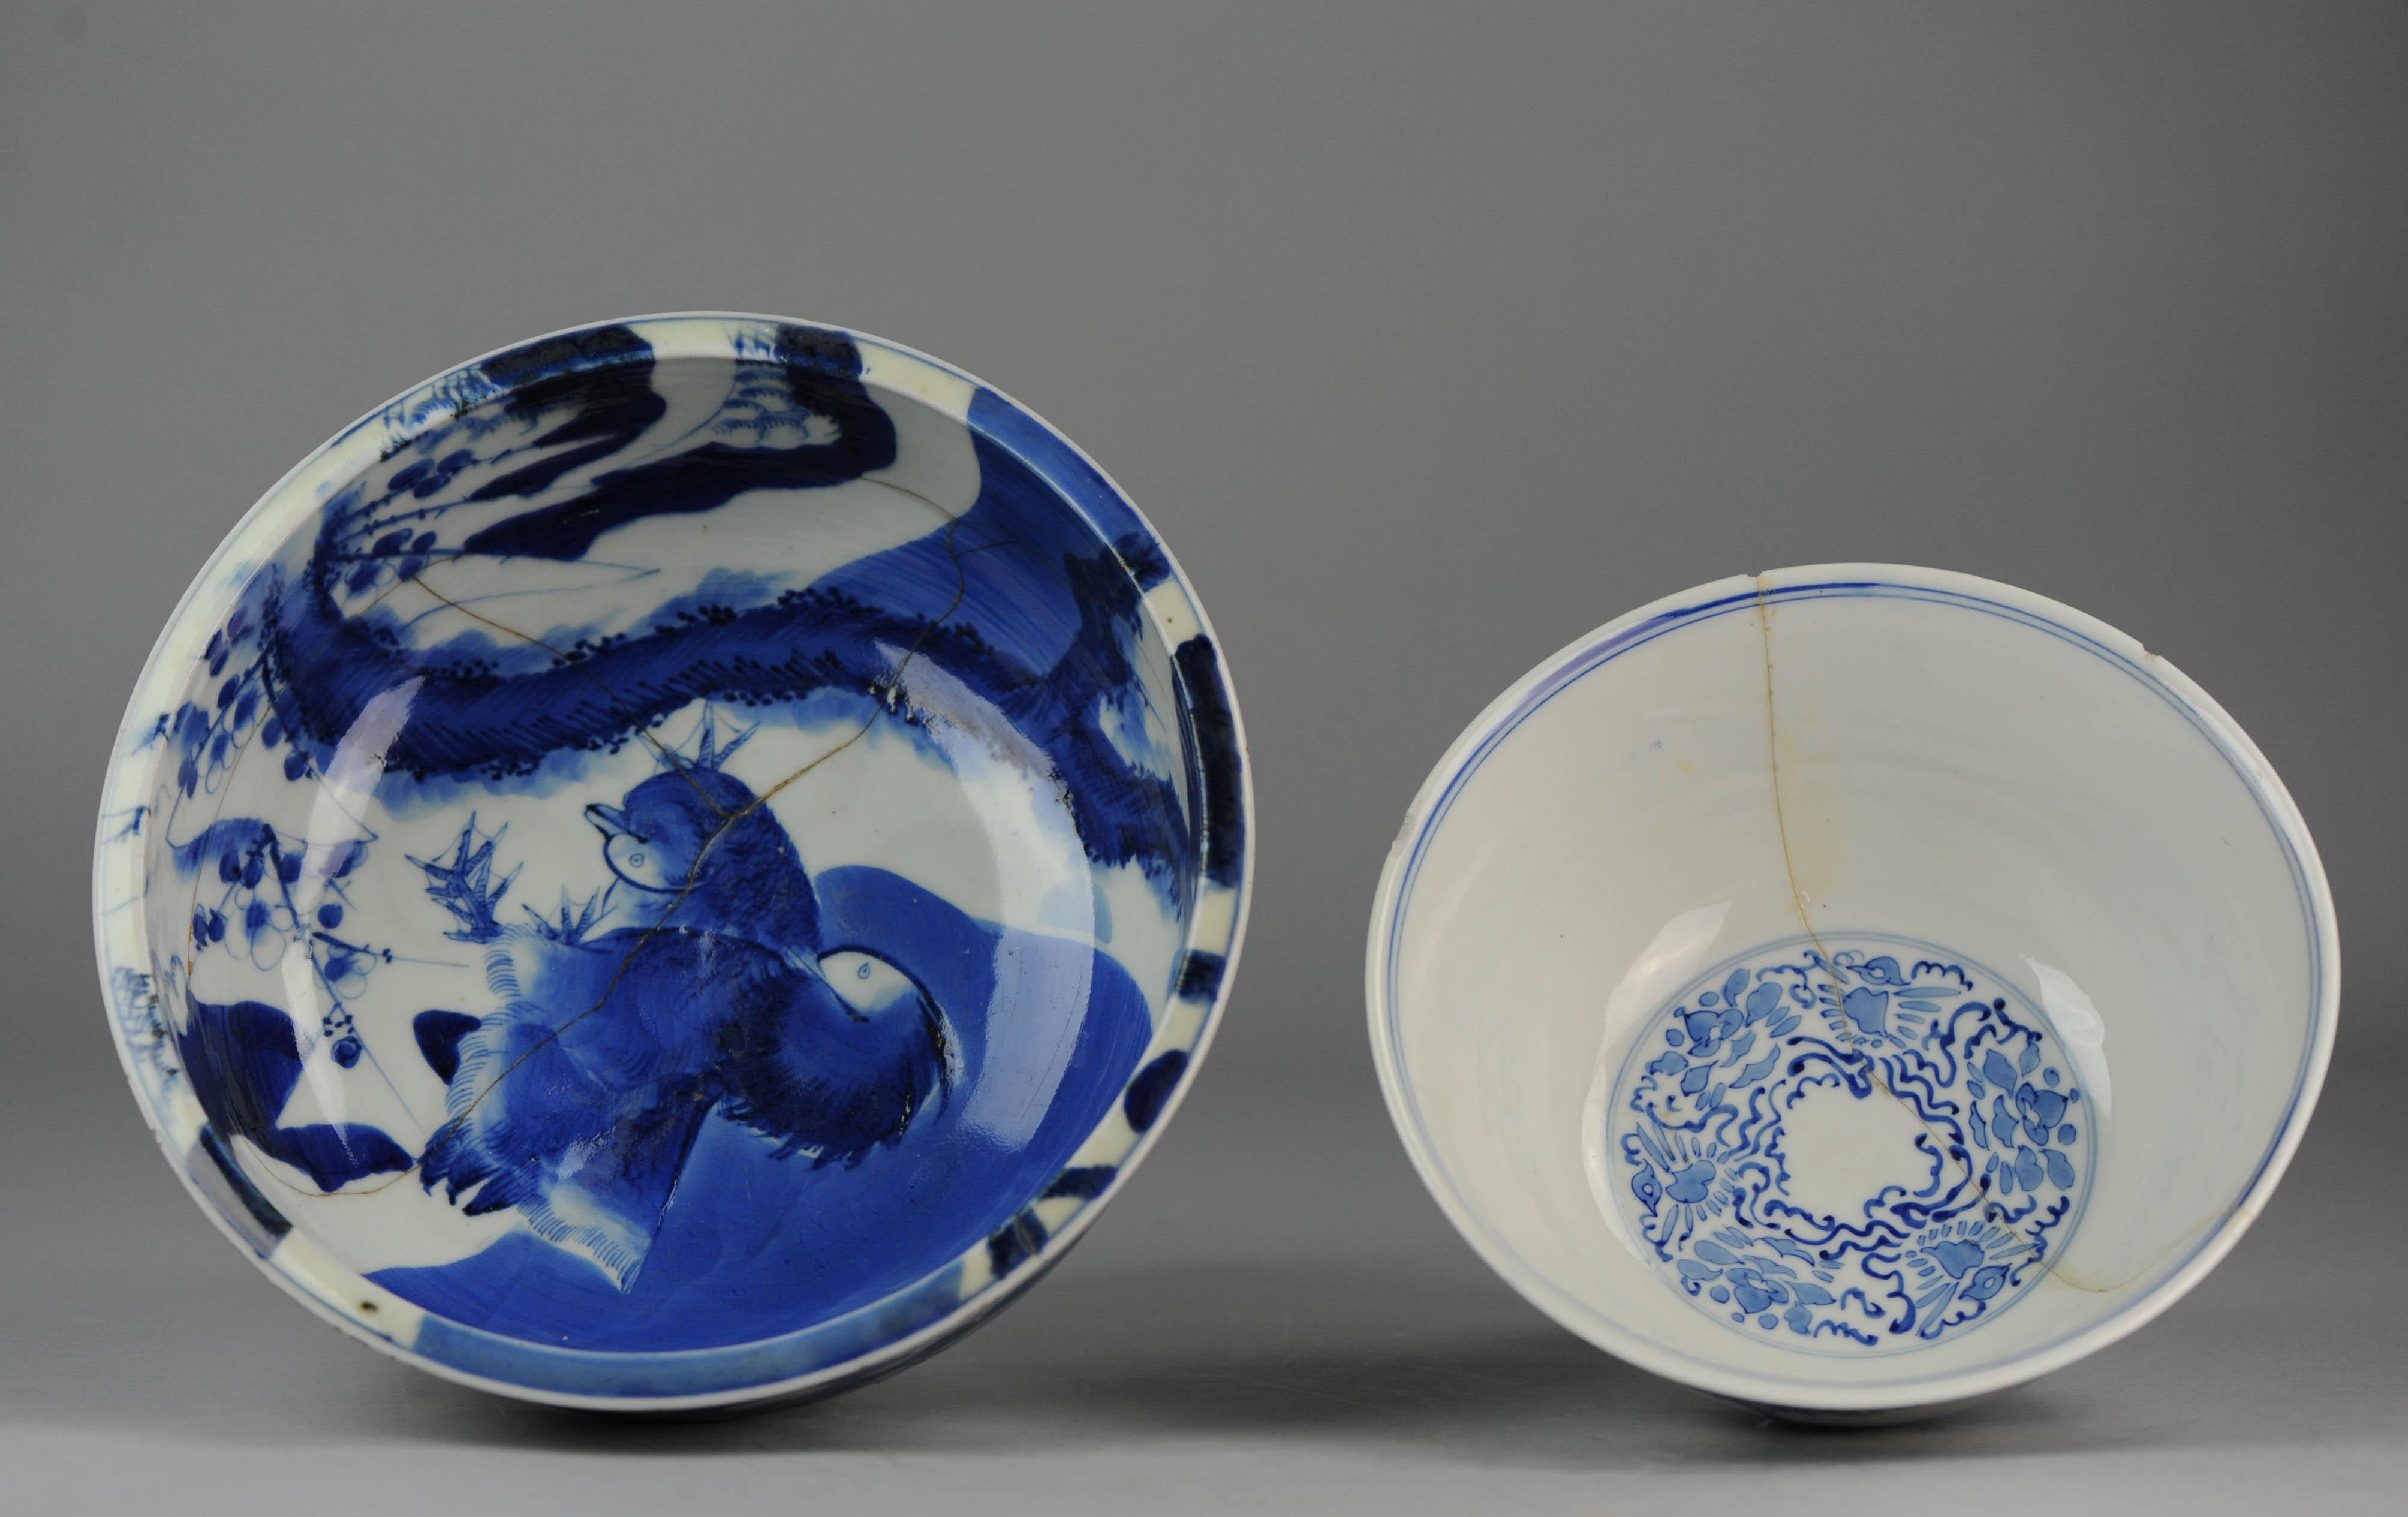 Lovely Set of 2 Japanese porcelain bowls/Basins.

Additional information:
Material: Porcelain & Pottery
Type: Basins (Washing & Fish Bowls & Planters), Bowls
Color: Blue & White
Region of Origin: Japan
Period: 19th century
Age: 19th